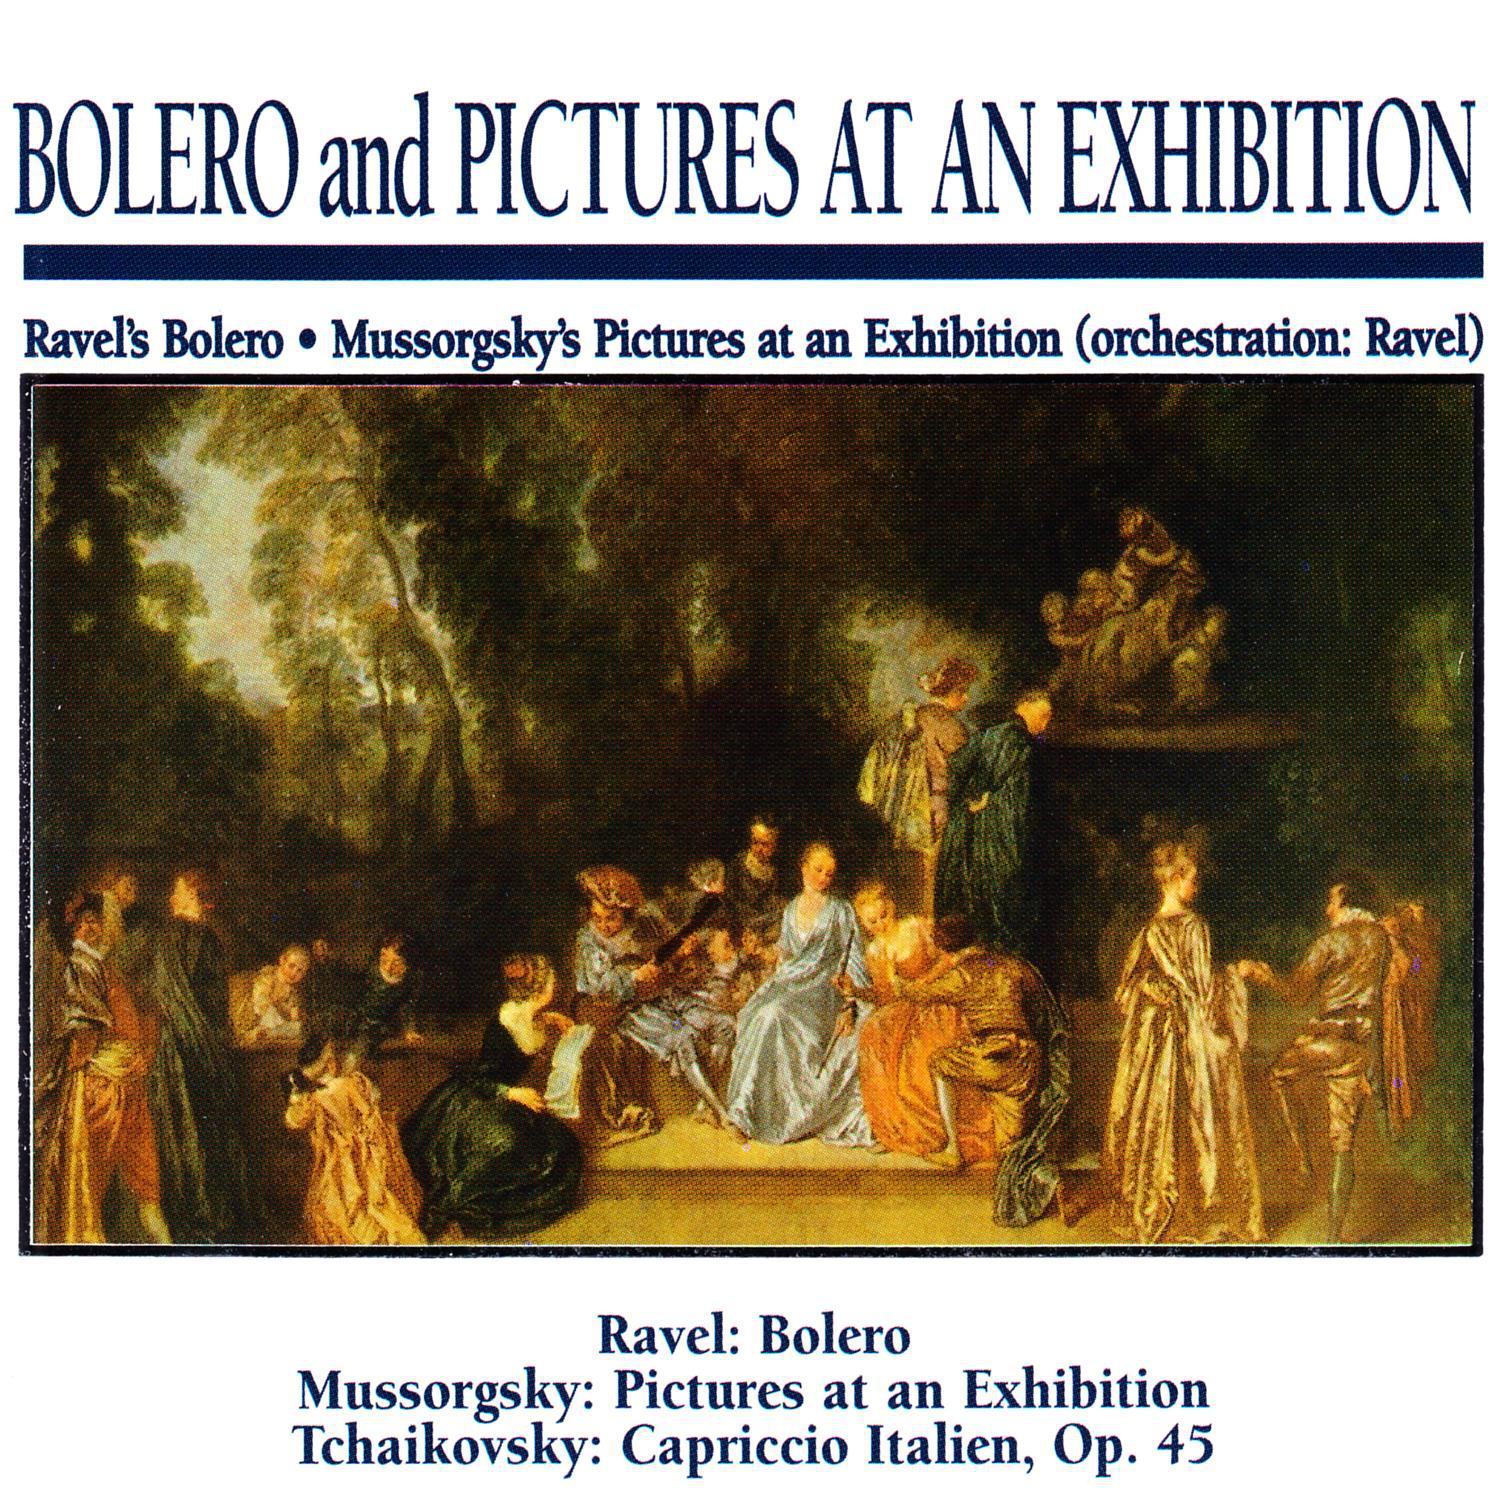 Bolero and Pictures at an Exhibition: Ravel' s Bolero  Mussorgsky' s Pictures at an Exhibition Orchestration: Ravel